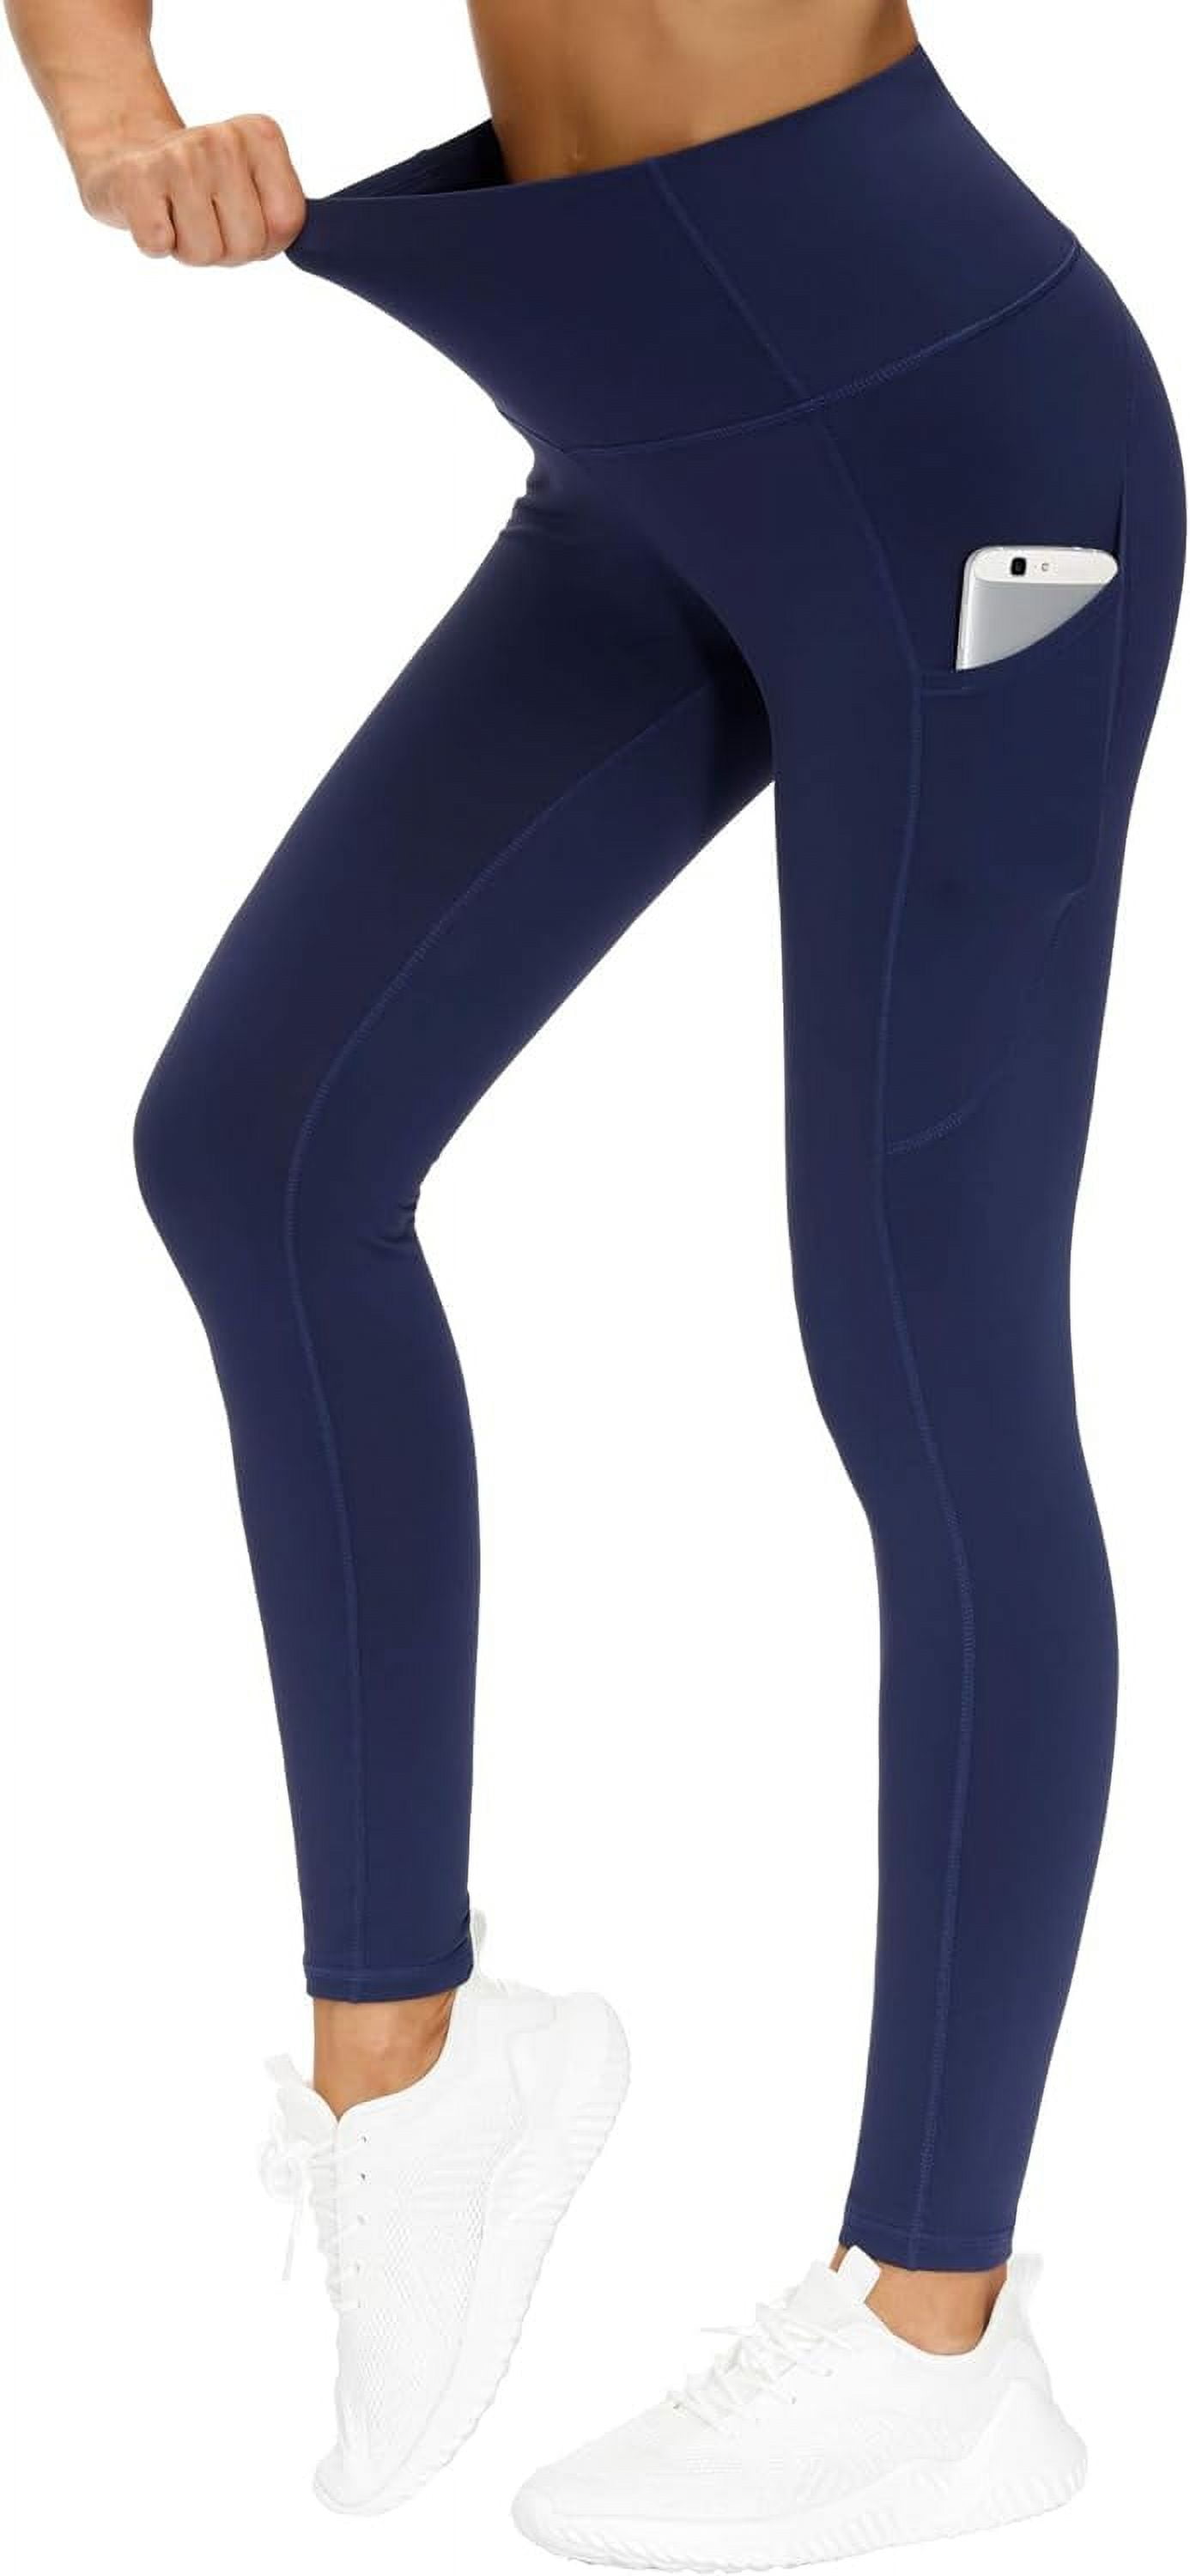 THE GYM PEOPLE Thick High Waist Yoga Pants with Pockets, 